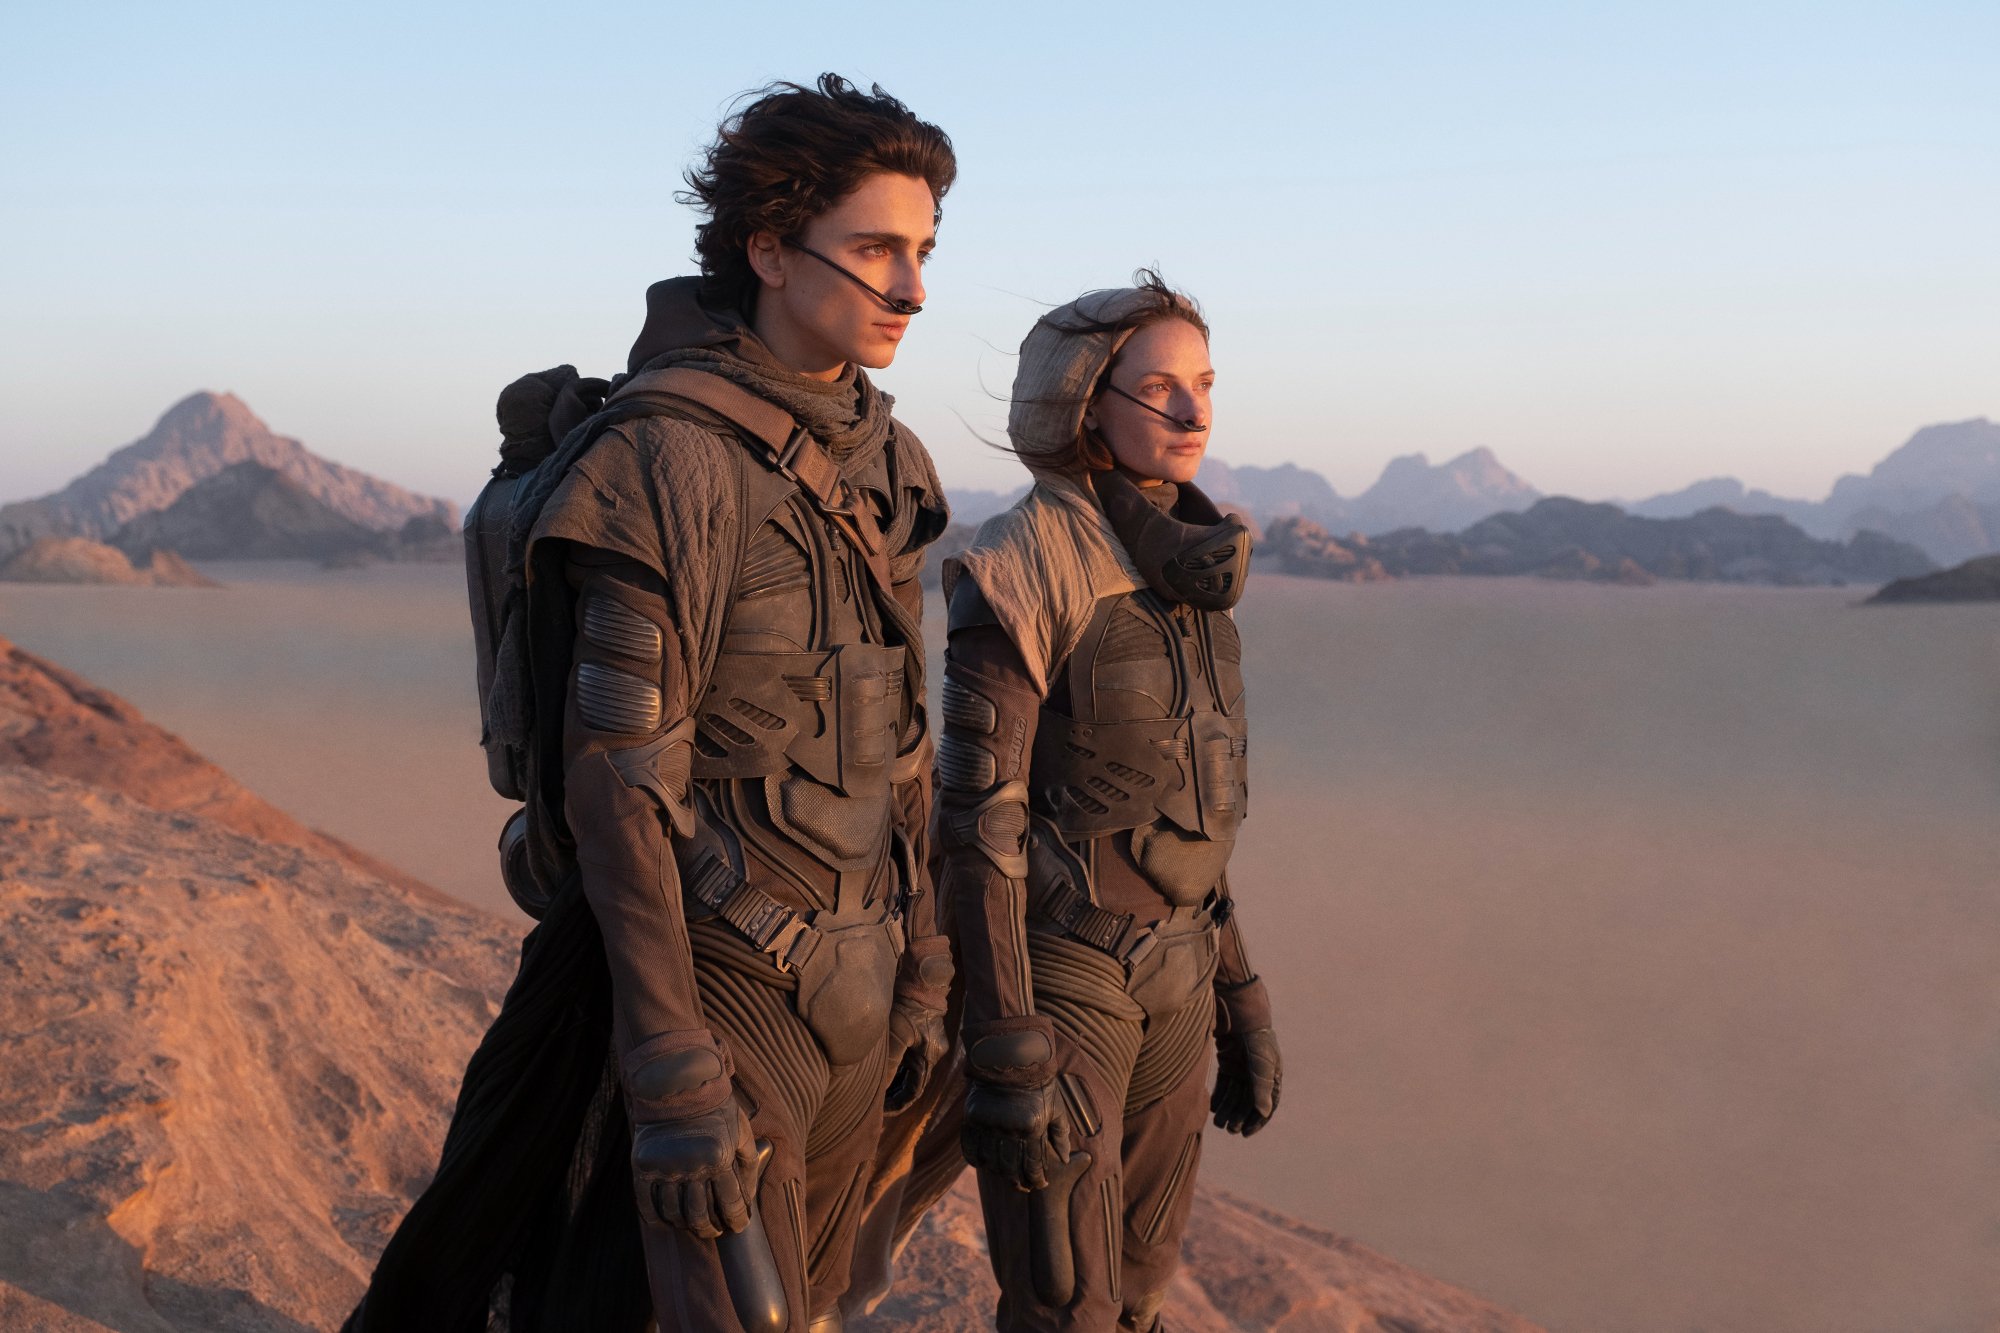 'Dune' actors Timothée Chalamet and Rebecca Ferguson looking out at the desert